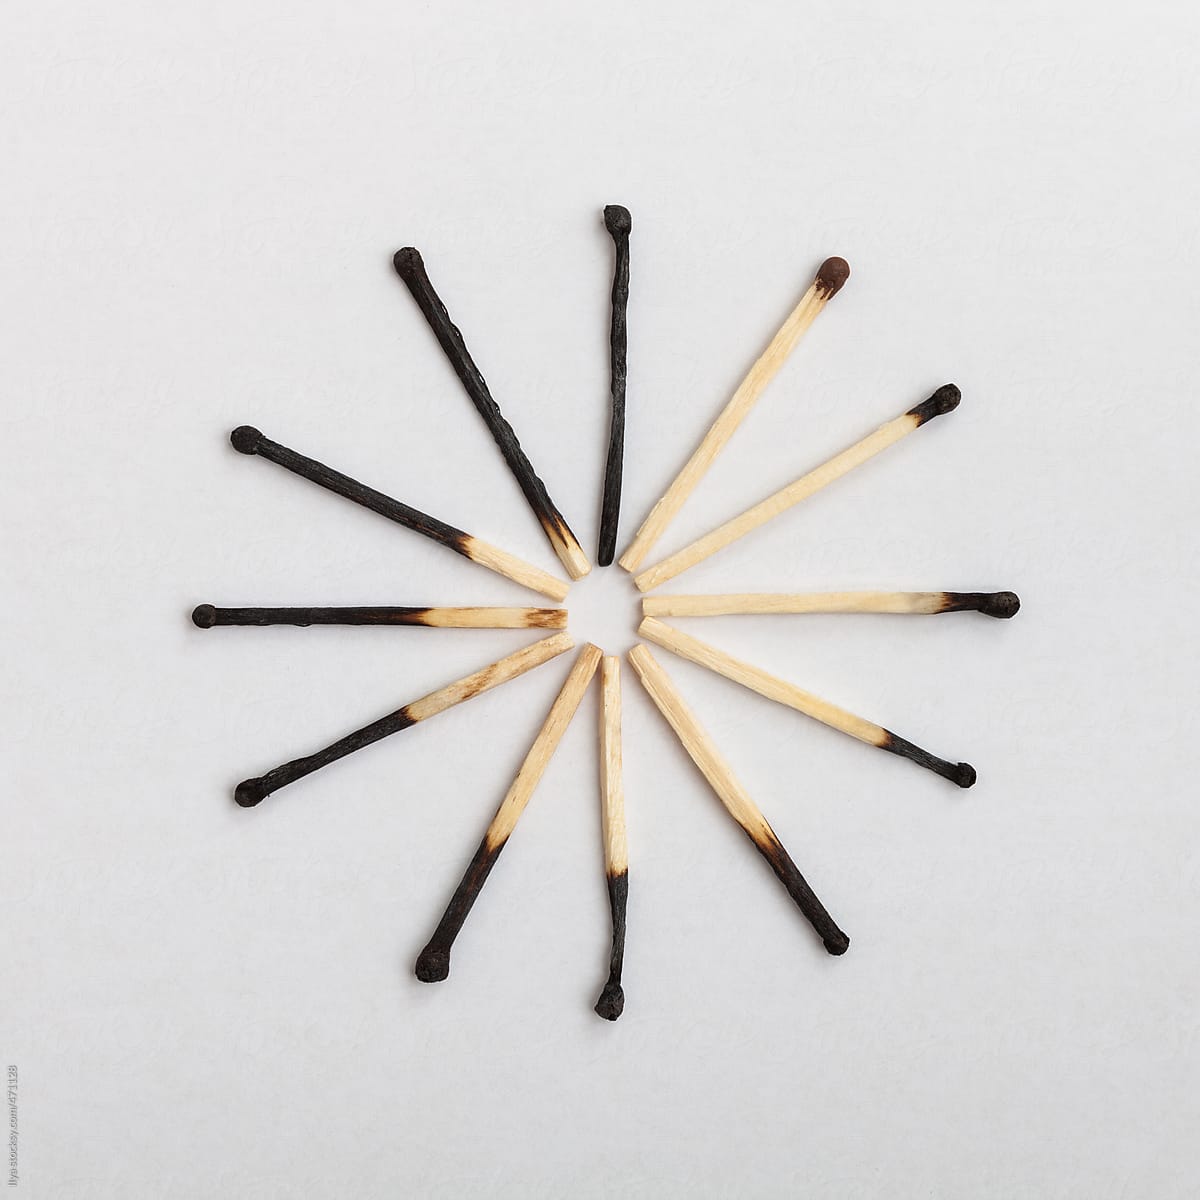 Time concept with matches